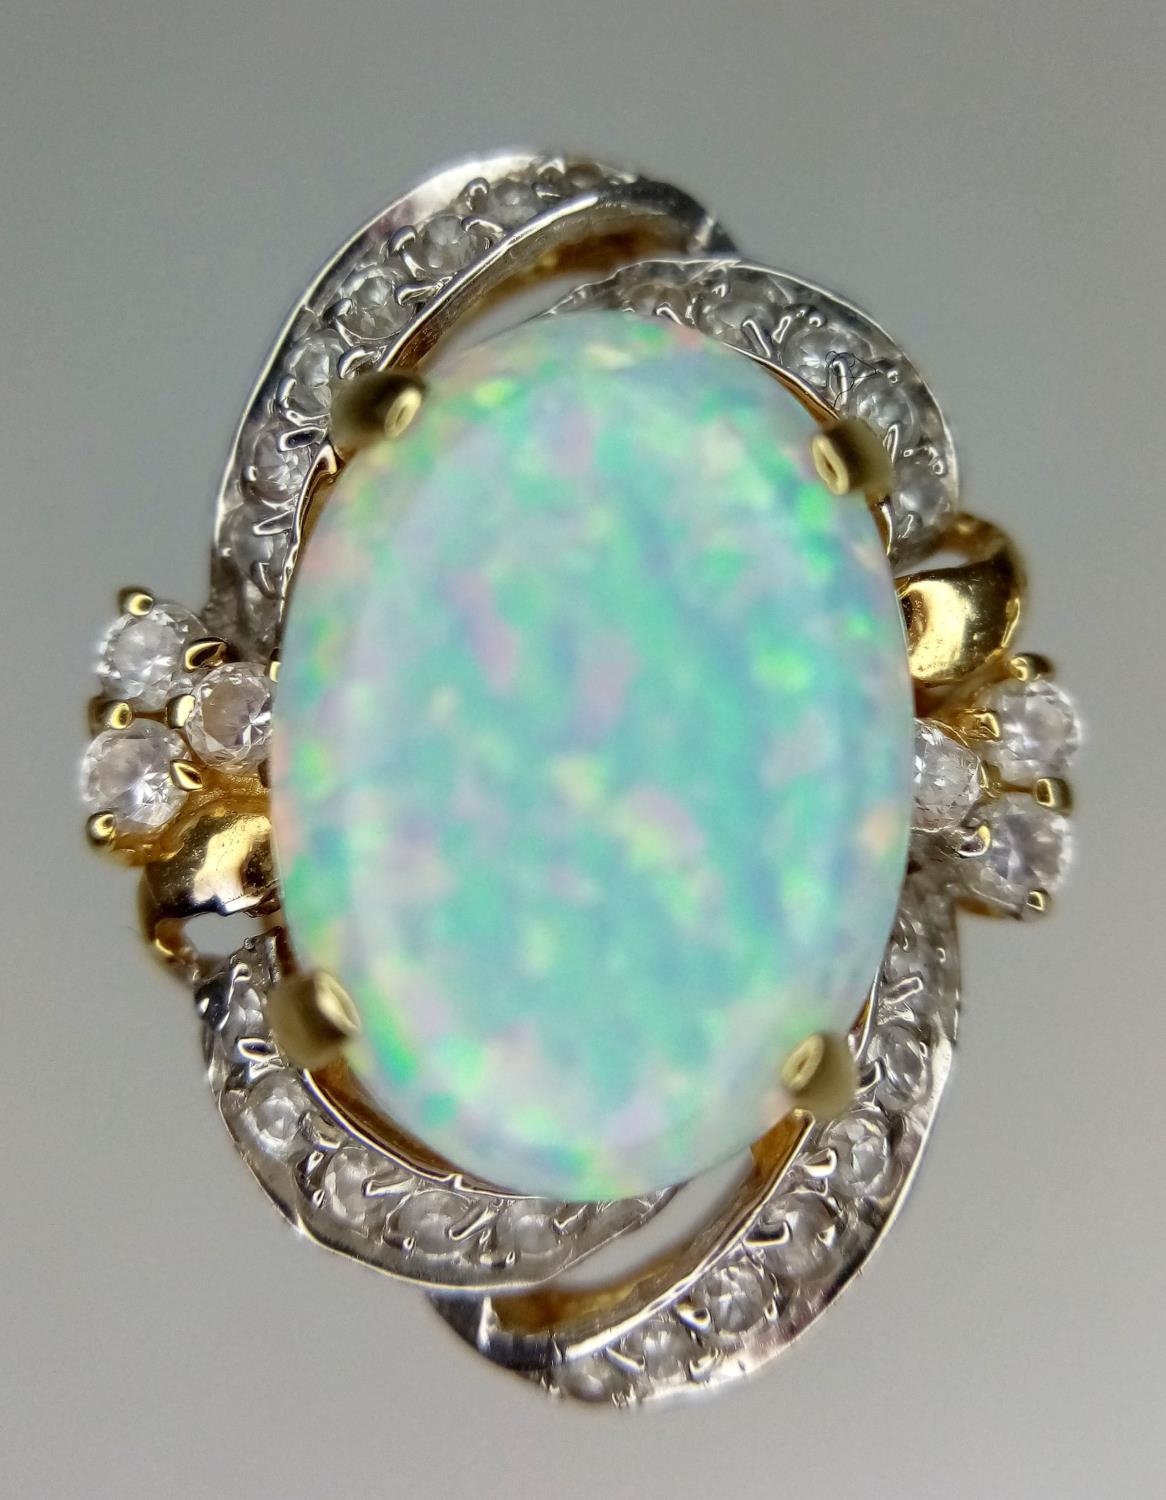 A 14K Yellow Gold and Opal Ring. White stone decoration. Size O. 6g total weight. - Image 4 of 7